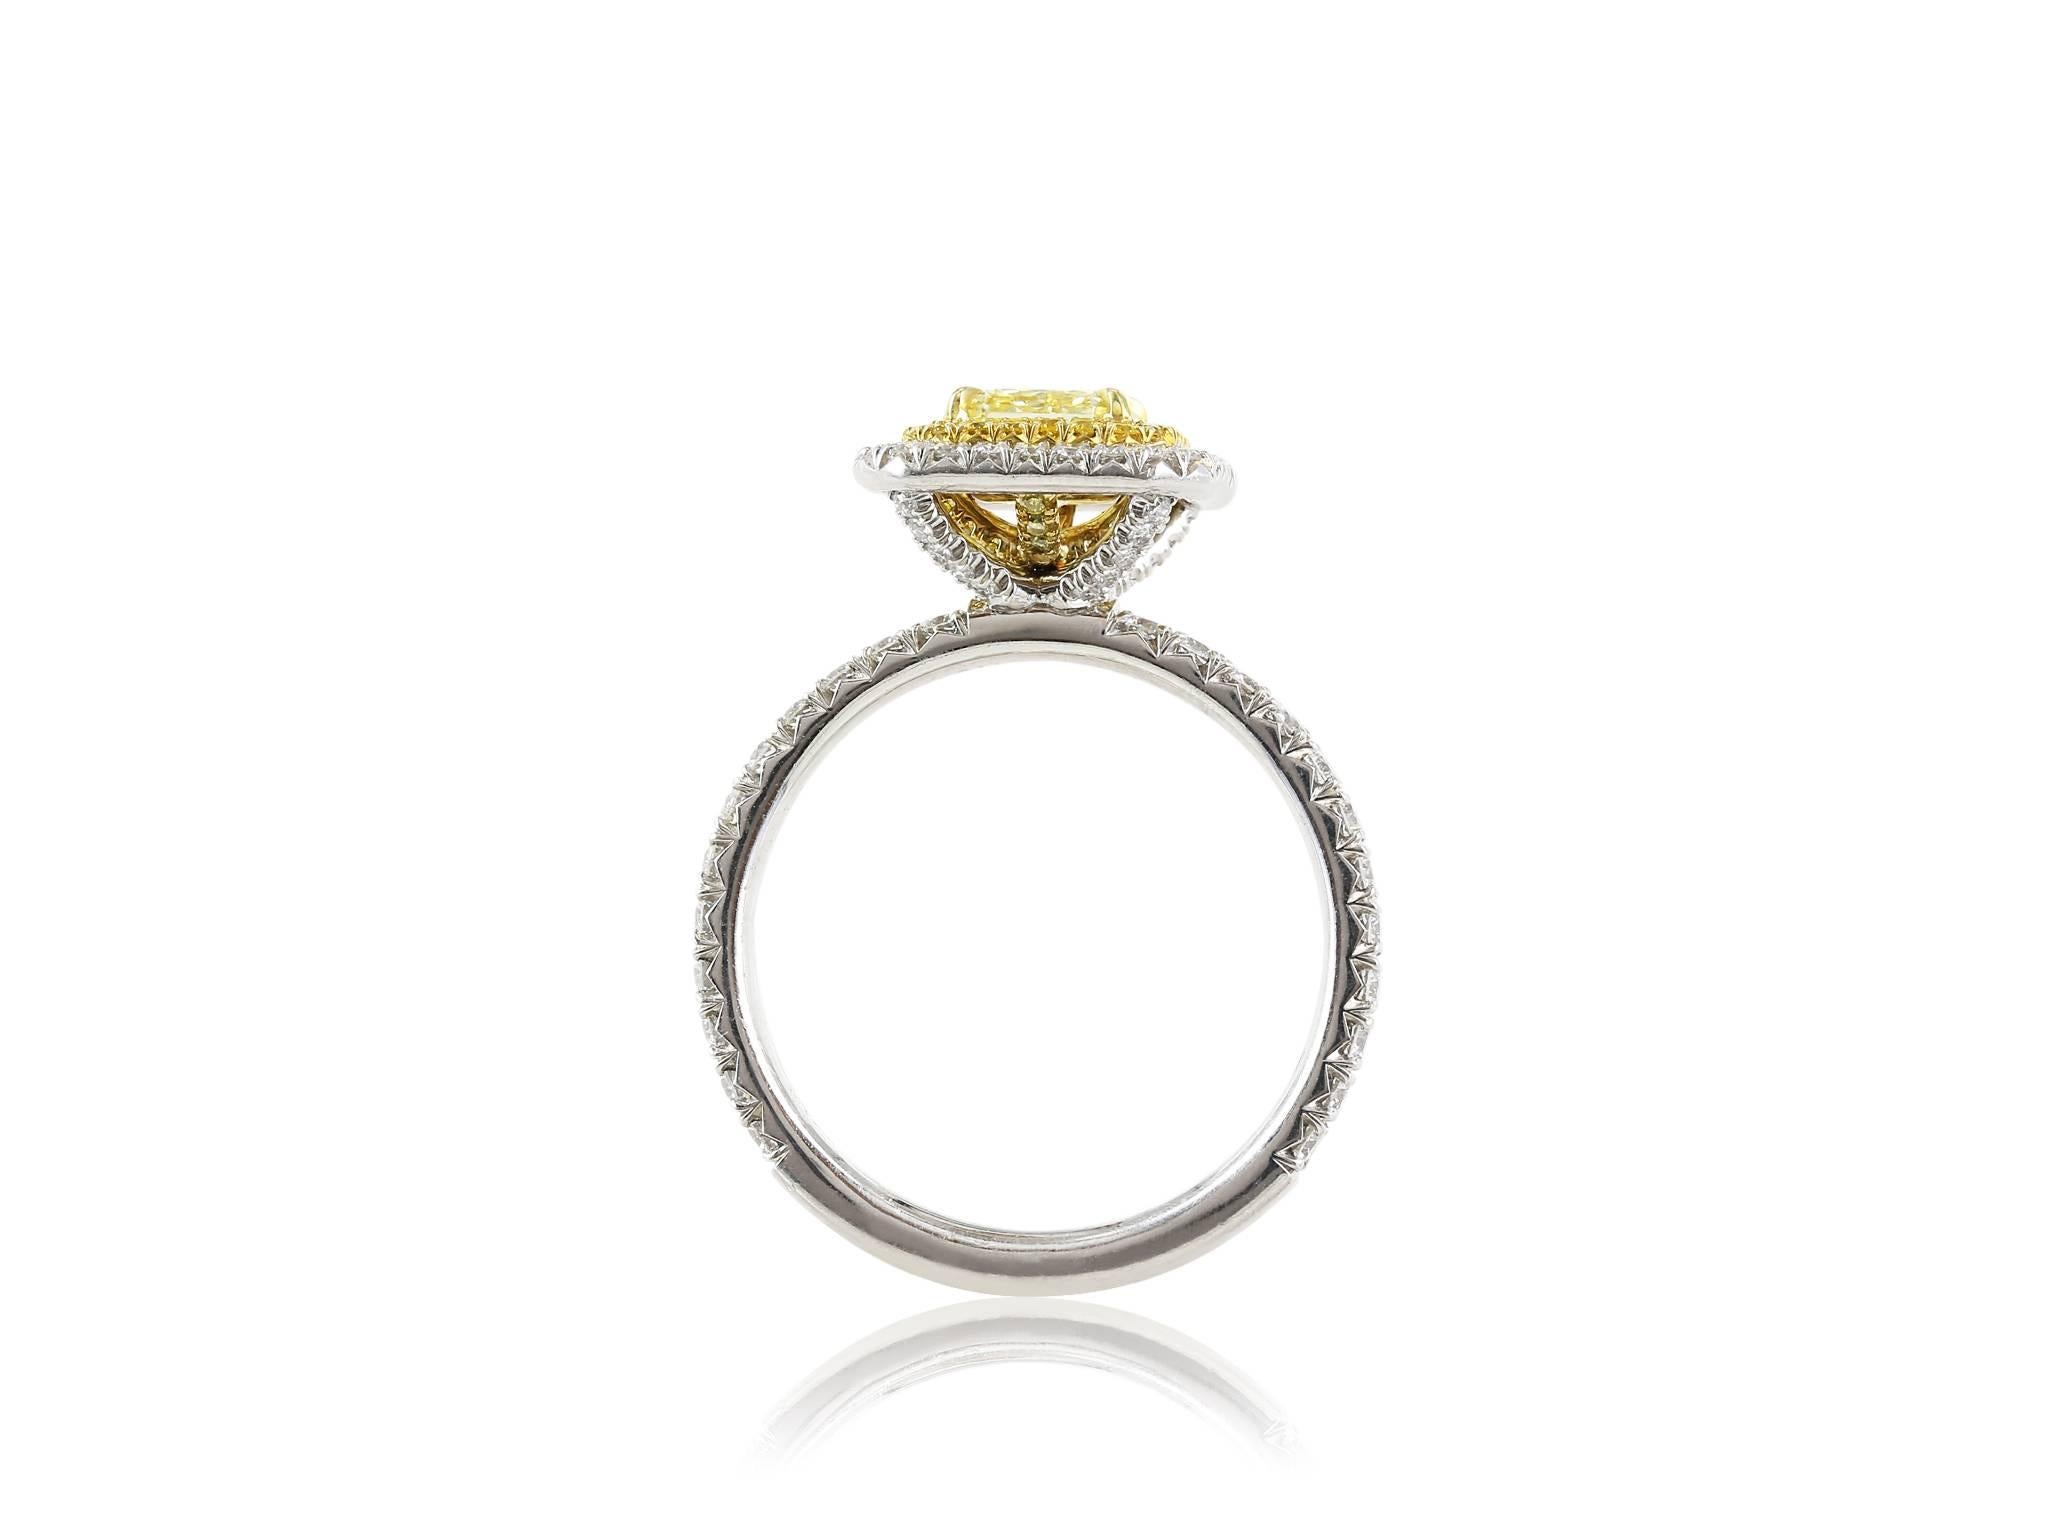 Platinum and 18 karat yellow gold hand made ring featuring 1 fancy yellow radiant diamond weighing 1.03 carats, measuring 5.42 x 5.36 x 3.63 mm with a VS1 clarity and with GIA certificate 2135696318 surrounded by .17 full cut yellow diamonds and .70